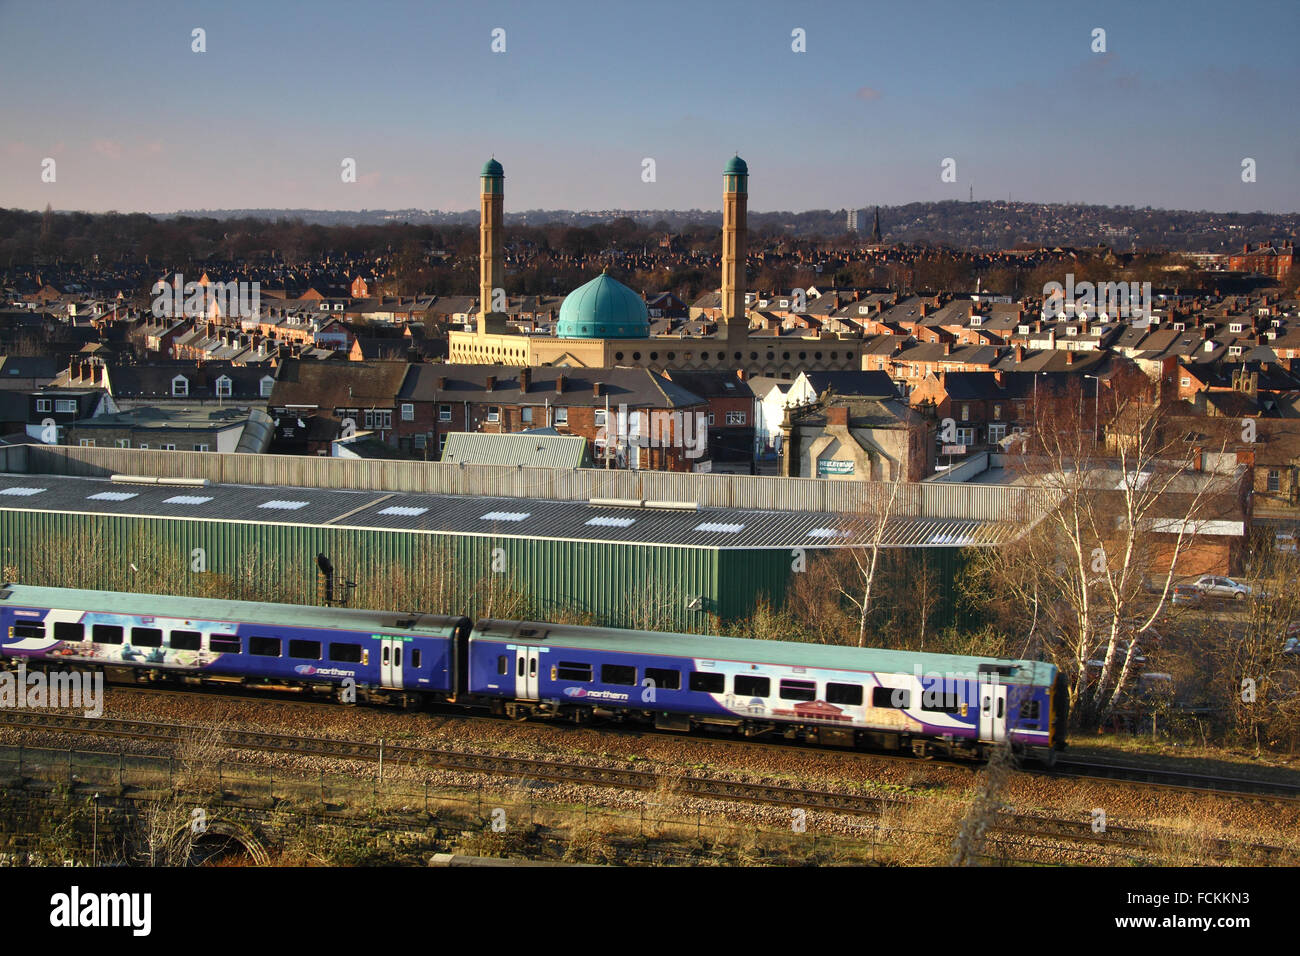 A train approaches Sheffield city centre with views over the Madina Masjid mosque, housing and distant hills, Yorkshire England Stock Photo